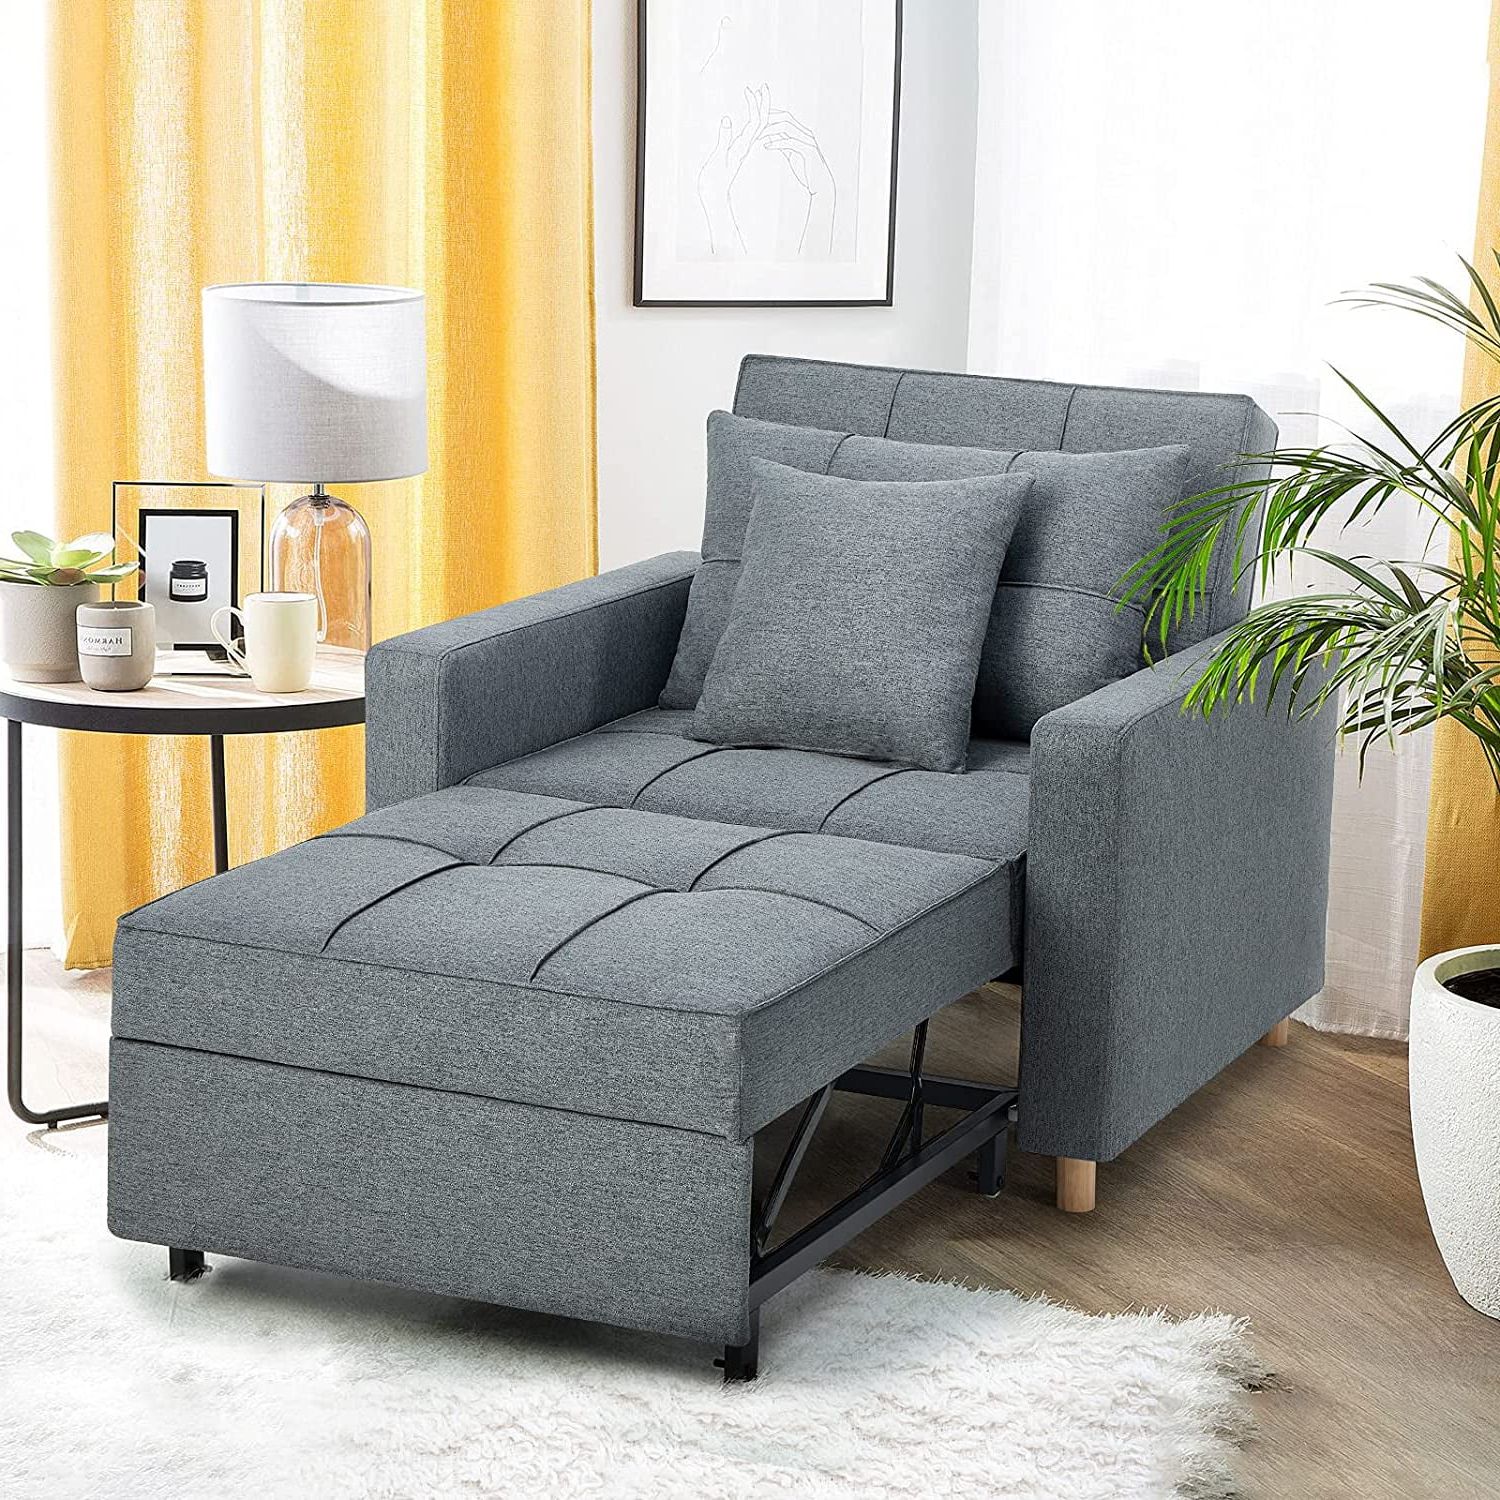 Yodolla 3 In 1 Futon Sofa Bed Chair With Adjustable Backrest Into A Regarding Adjustable Backrest Futon Sofa Beds (View 7 of 20)